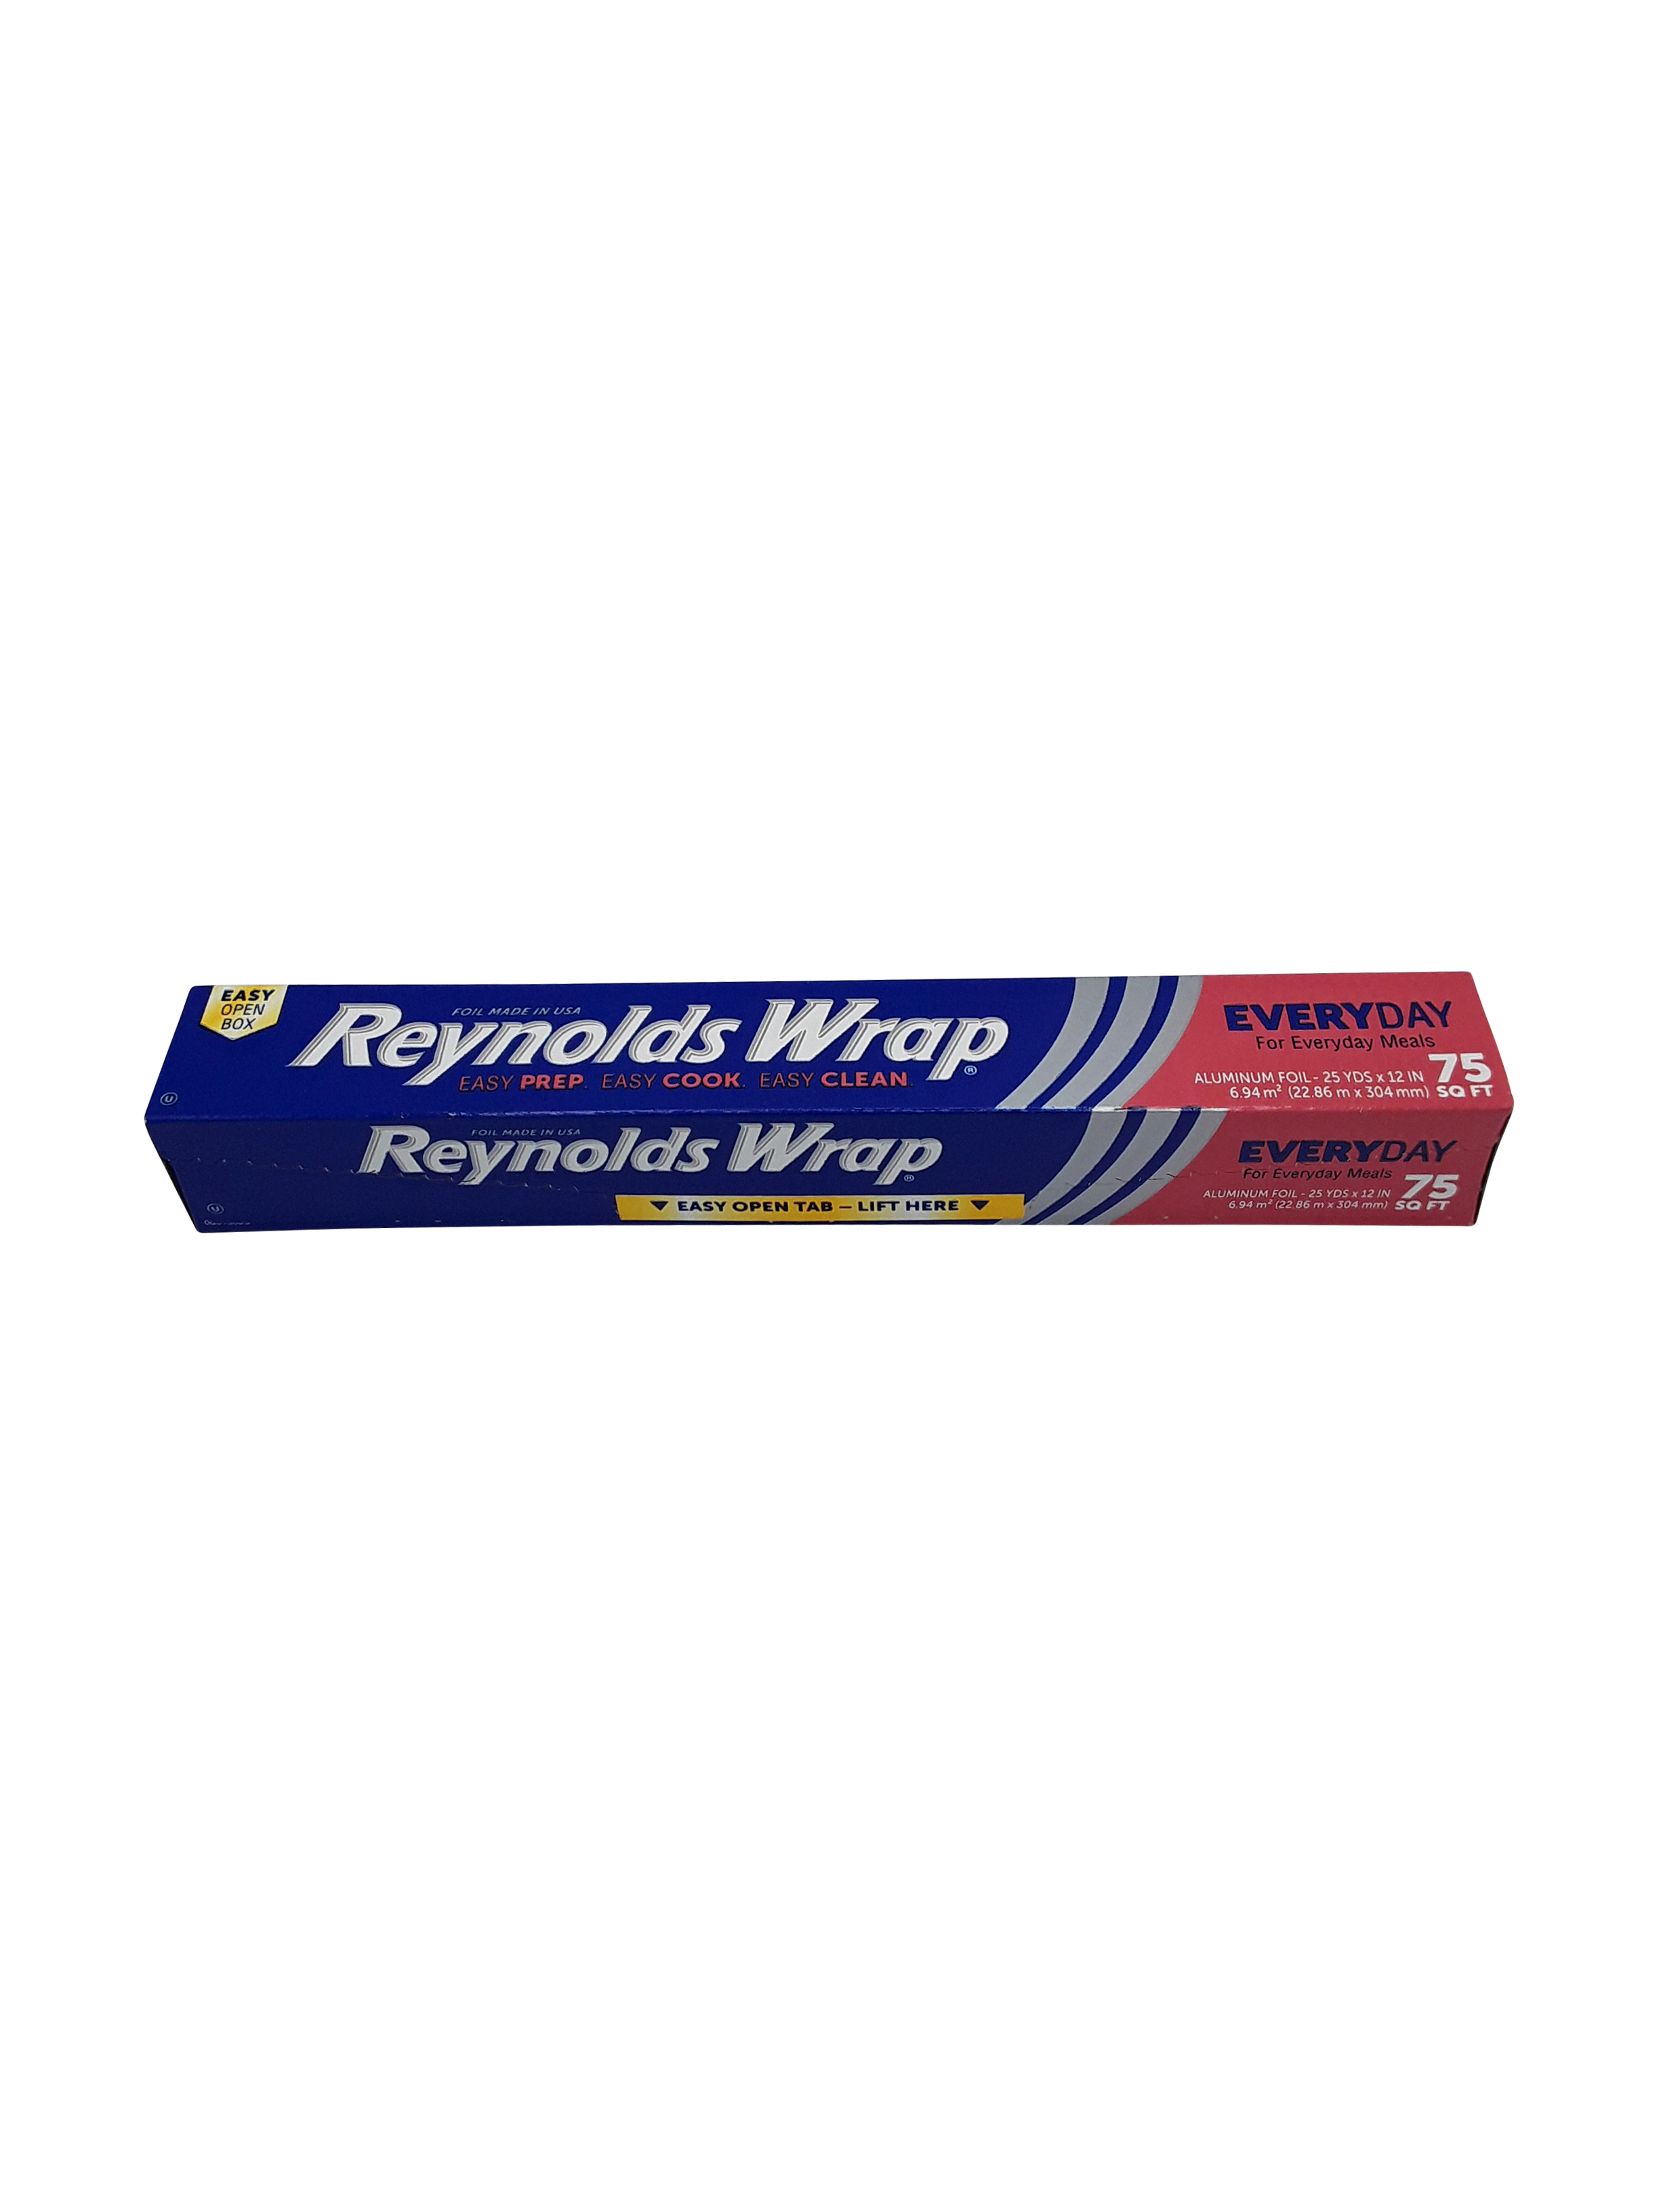 Reynolds Wrap Now Has an Easy Open and Close Tab